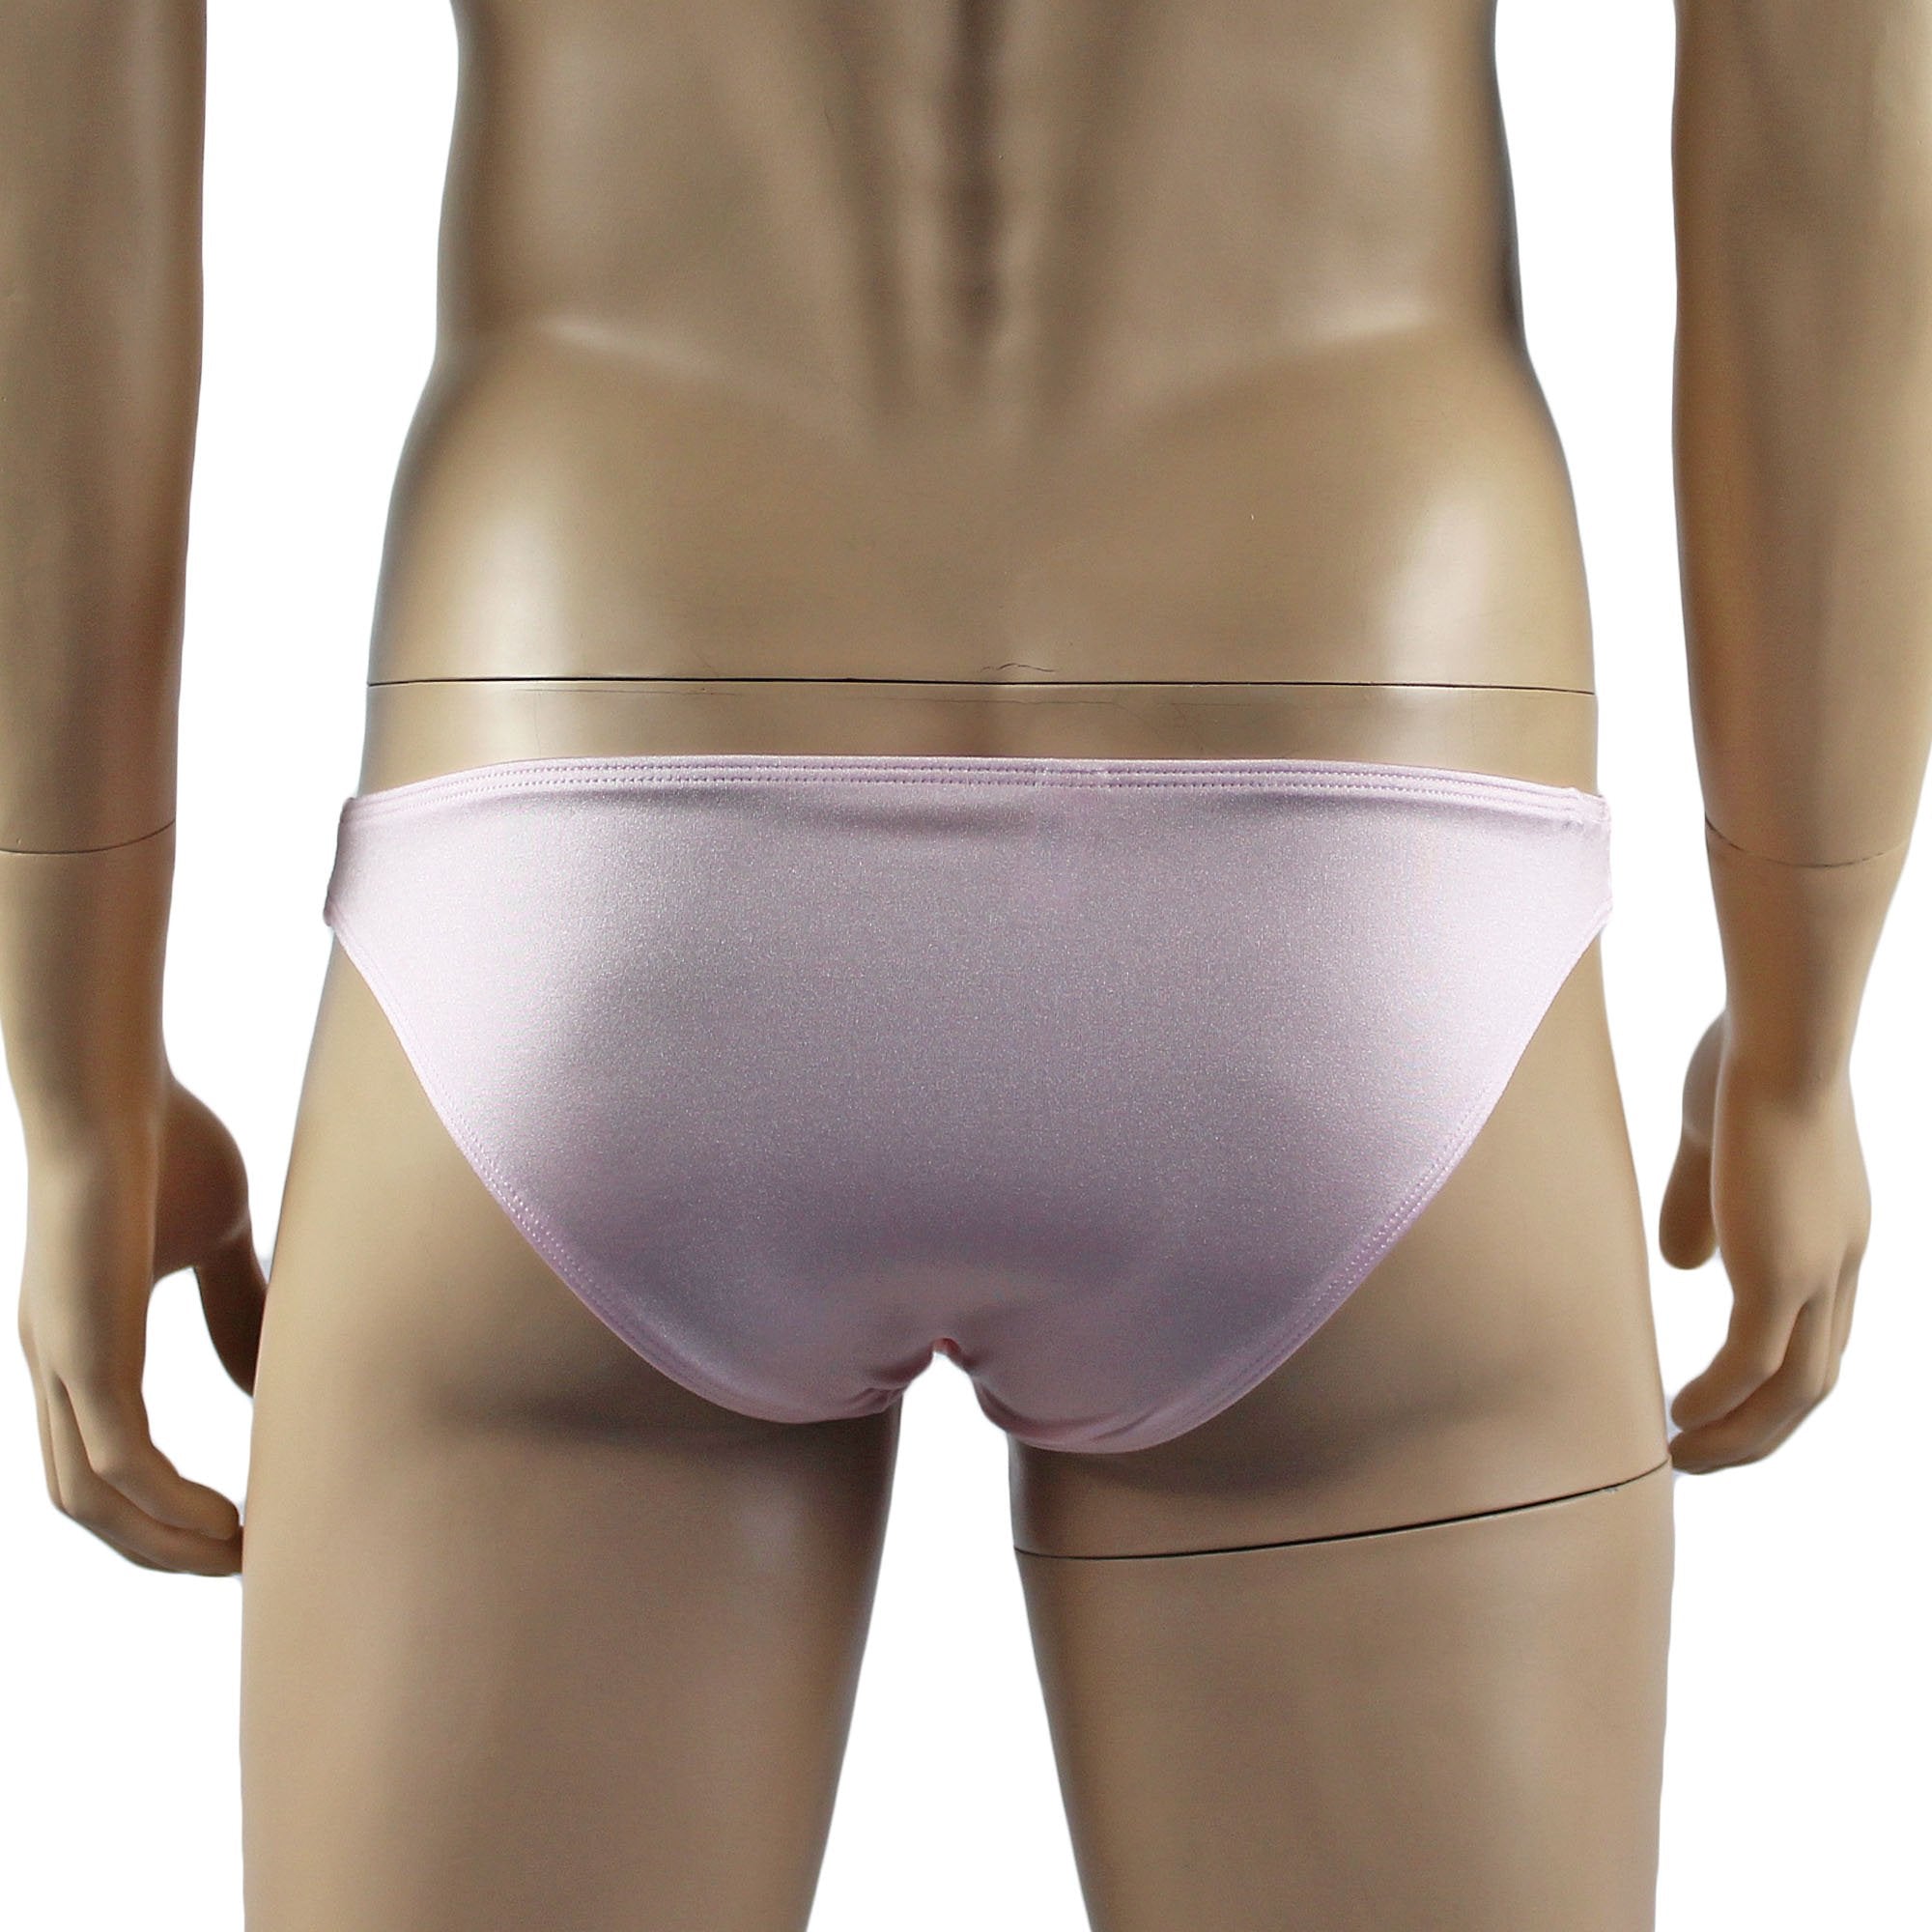 Mens Isabel Panty Stretch Spandex & Lace Bikini Brief with Sexy Back Light Pink and White Lace